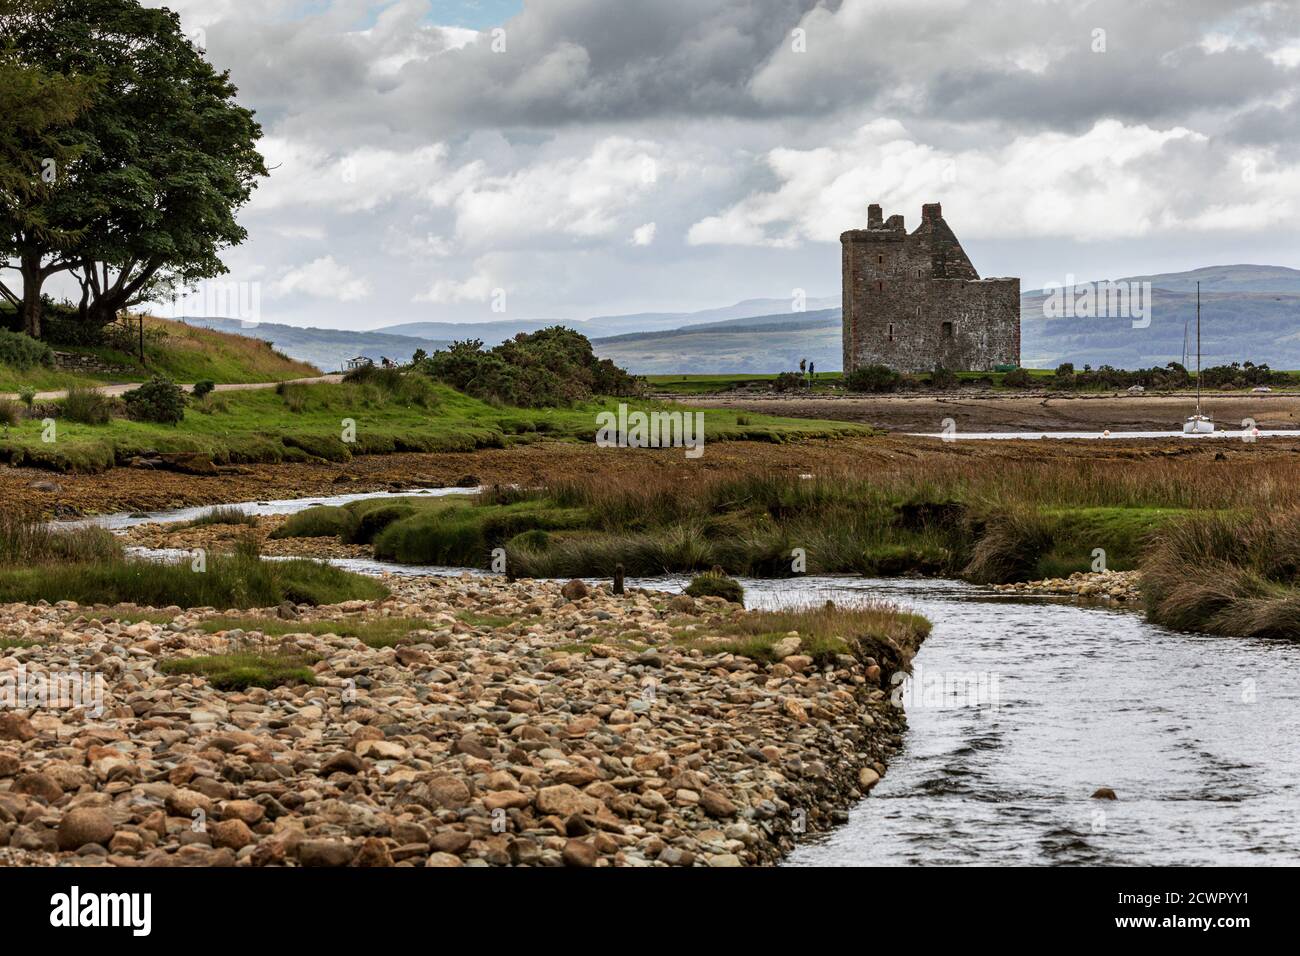 Lochranza Castle, a 13th century tower house, stands on the beach beside Lochranza Harbour on the Isle of Arran, Scotland. Stock Photo